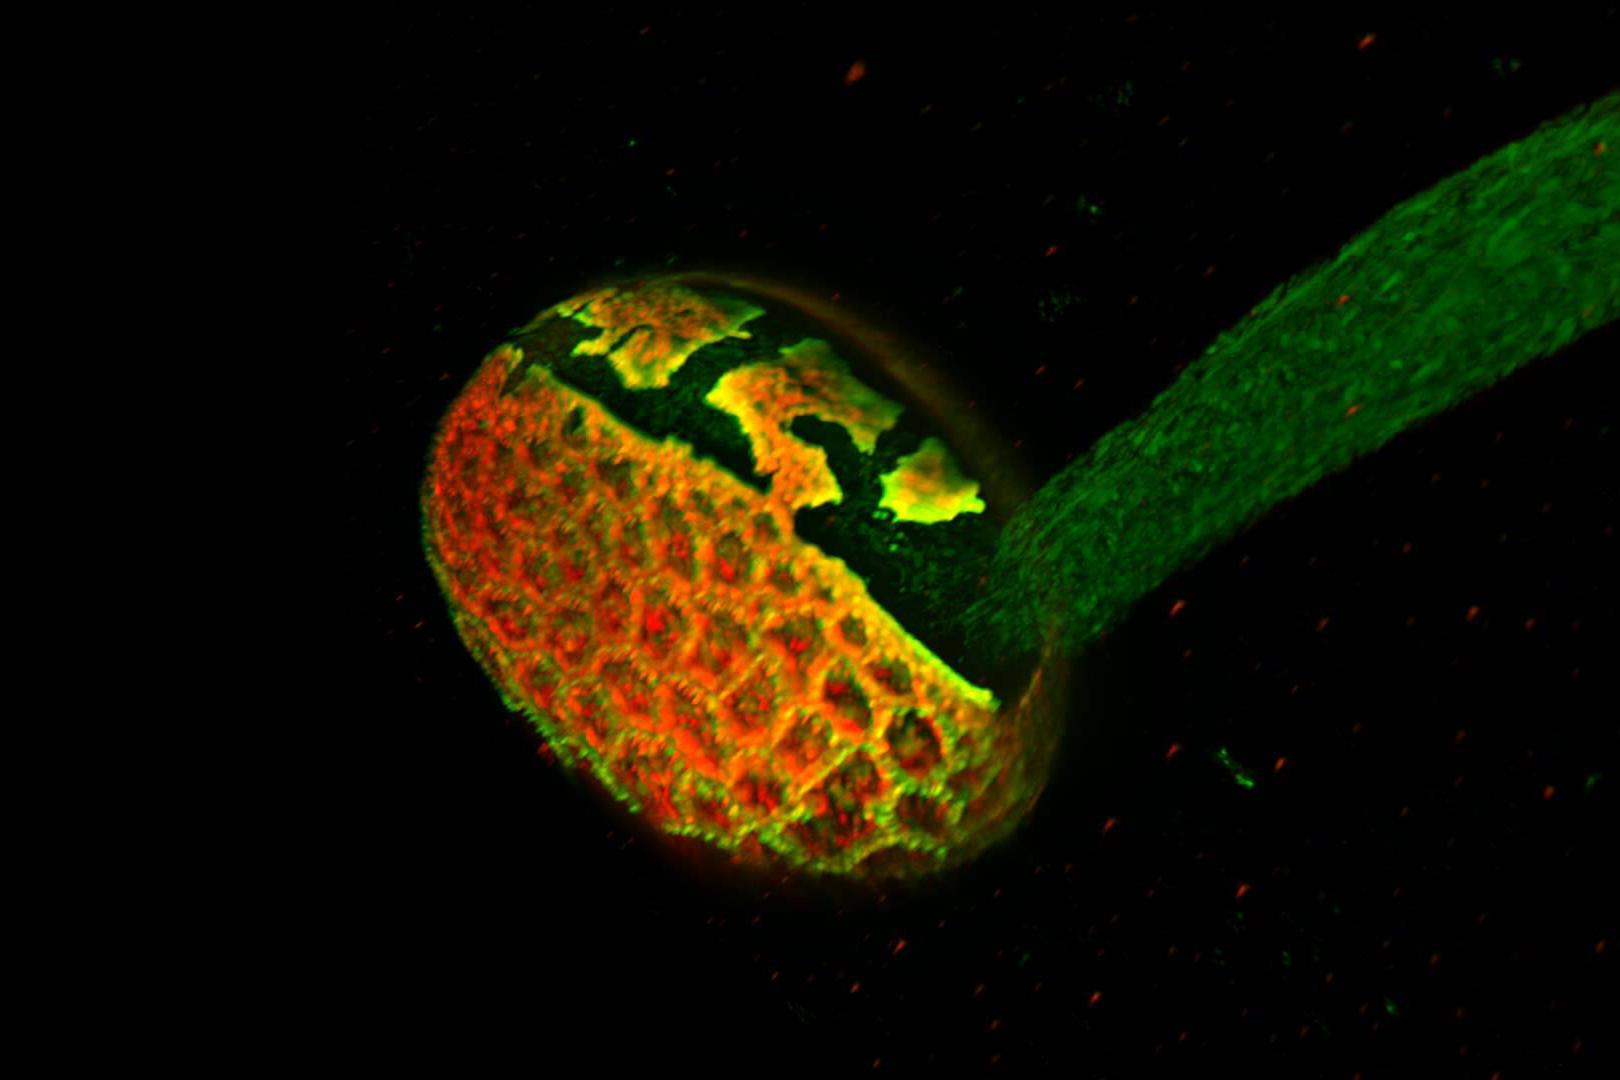 Pollen tube stained for mitochondria (MitoTracker Green, green) and Lysosomes (Lysotracker Red, red). Watch the pollen tube extend from the crack in the pollen grain (visualized by its autofluorescence). Mitochondria don't quite advance to the very tip of the pollen tube but stop a few microns before the tip. Rendering of the data set was performed in arivis Vision4D®. Sample: courtesy of R. Whan, UNSW, Sydney, Australia.